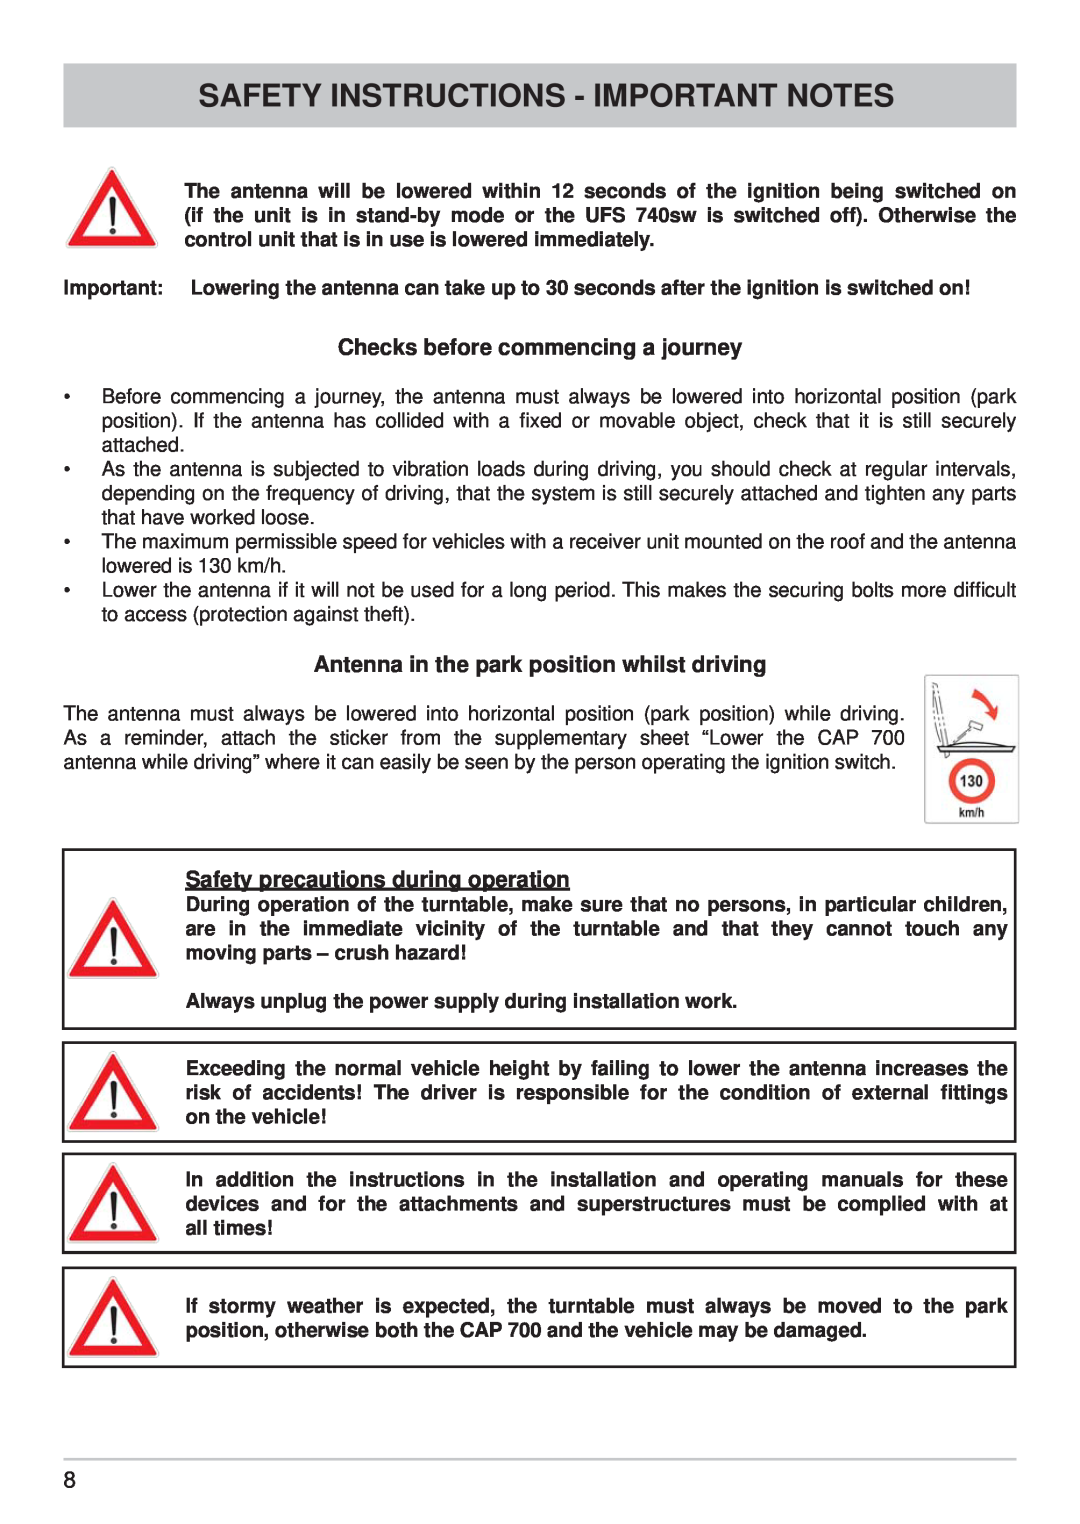 Kathrein CAP 700 manual Safety Instructions - Important Notes, Checks before commencing a journey 